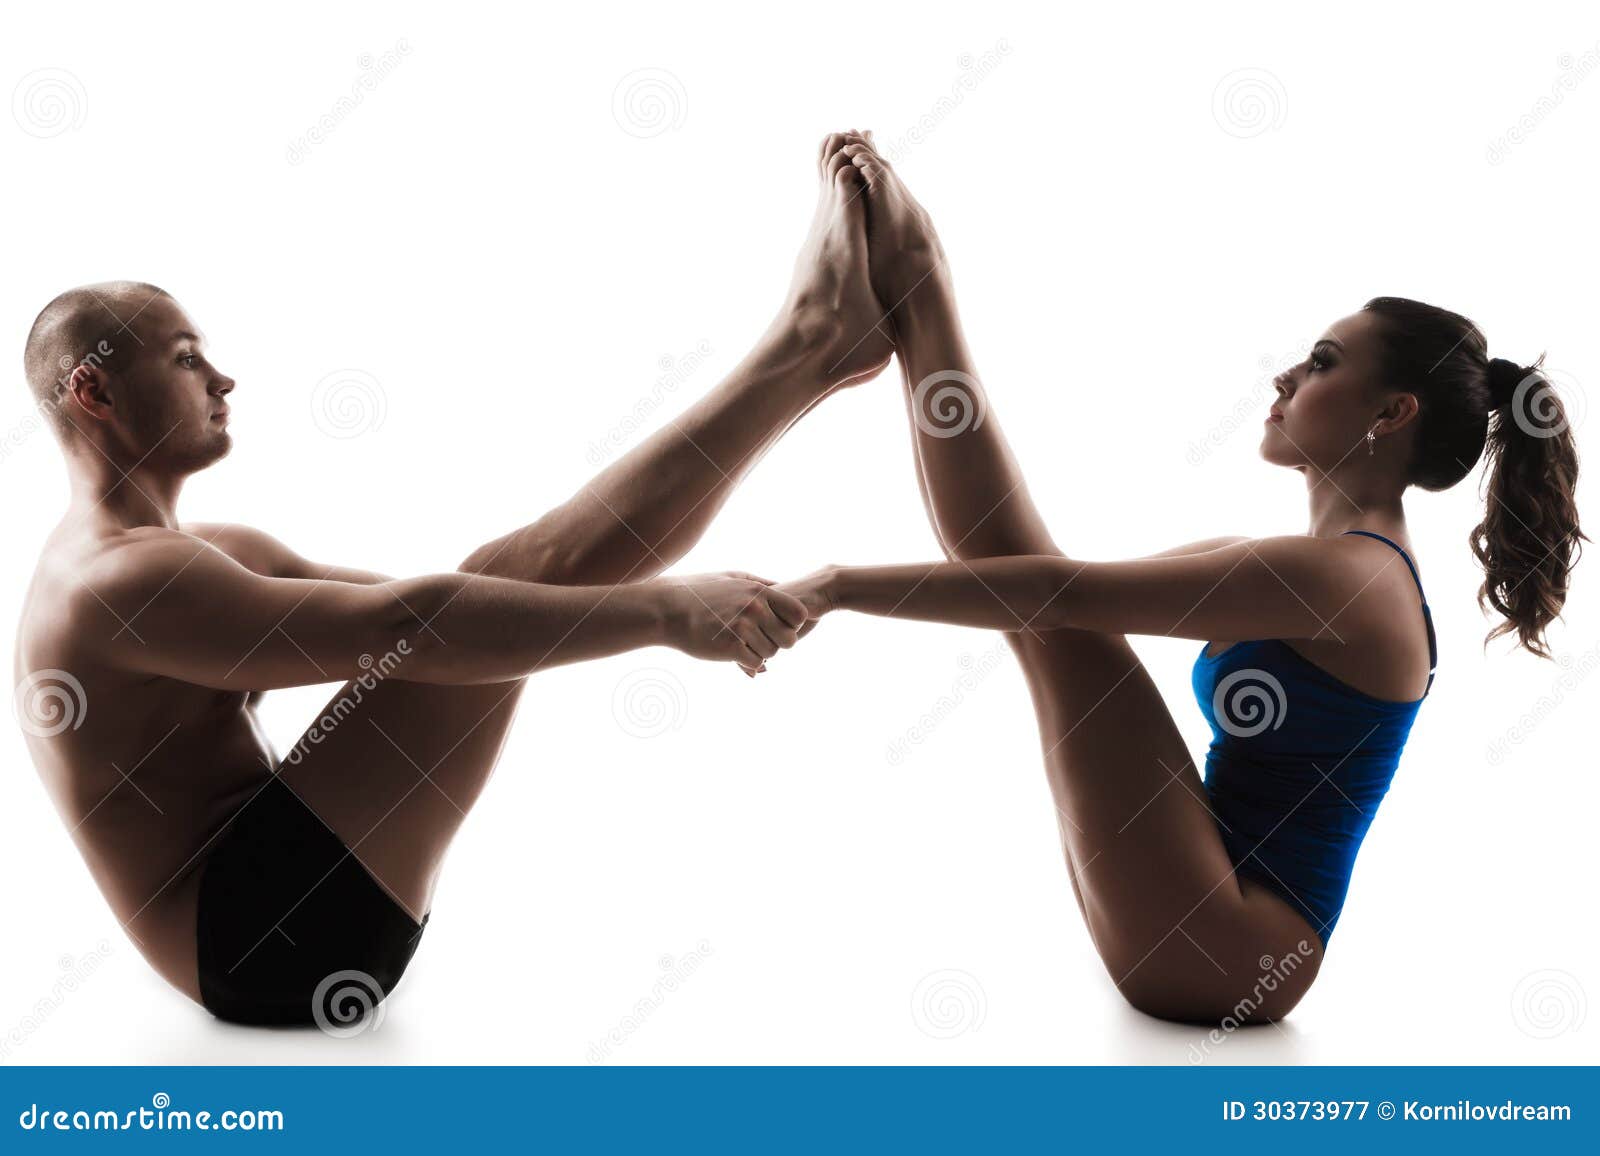 50 Partner Yoga Poses for Friends or Couples - Yoga Rove